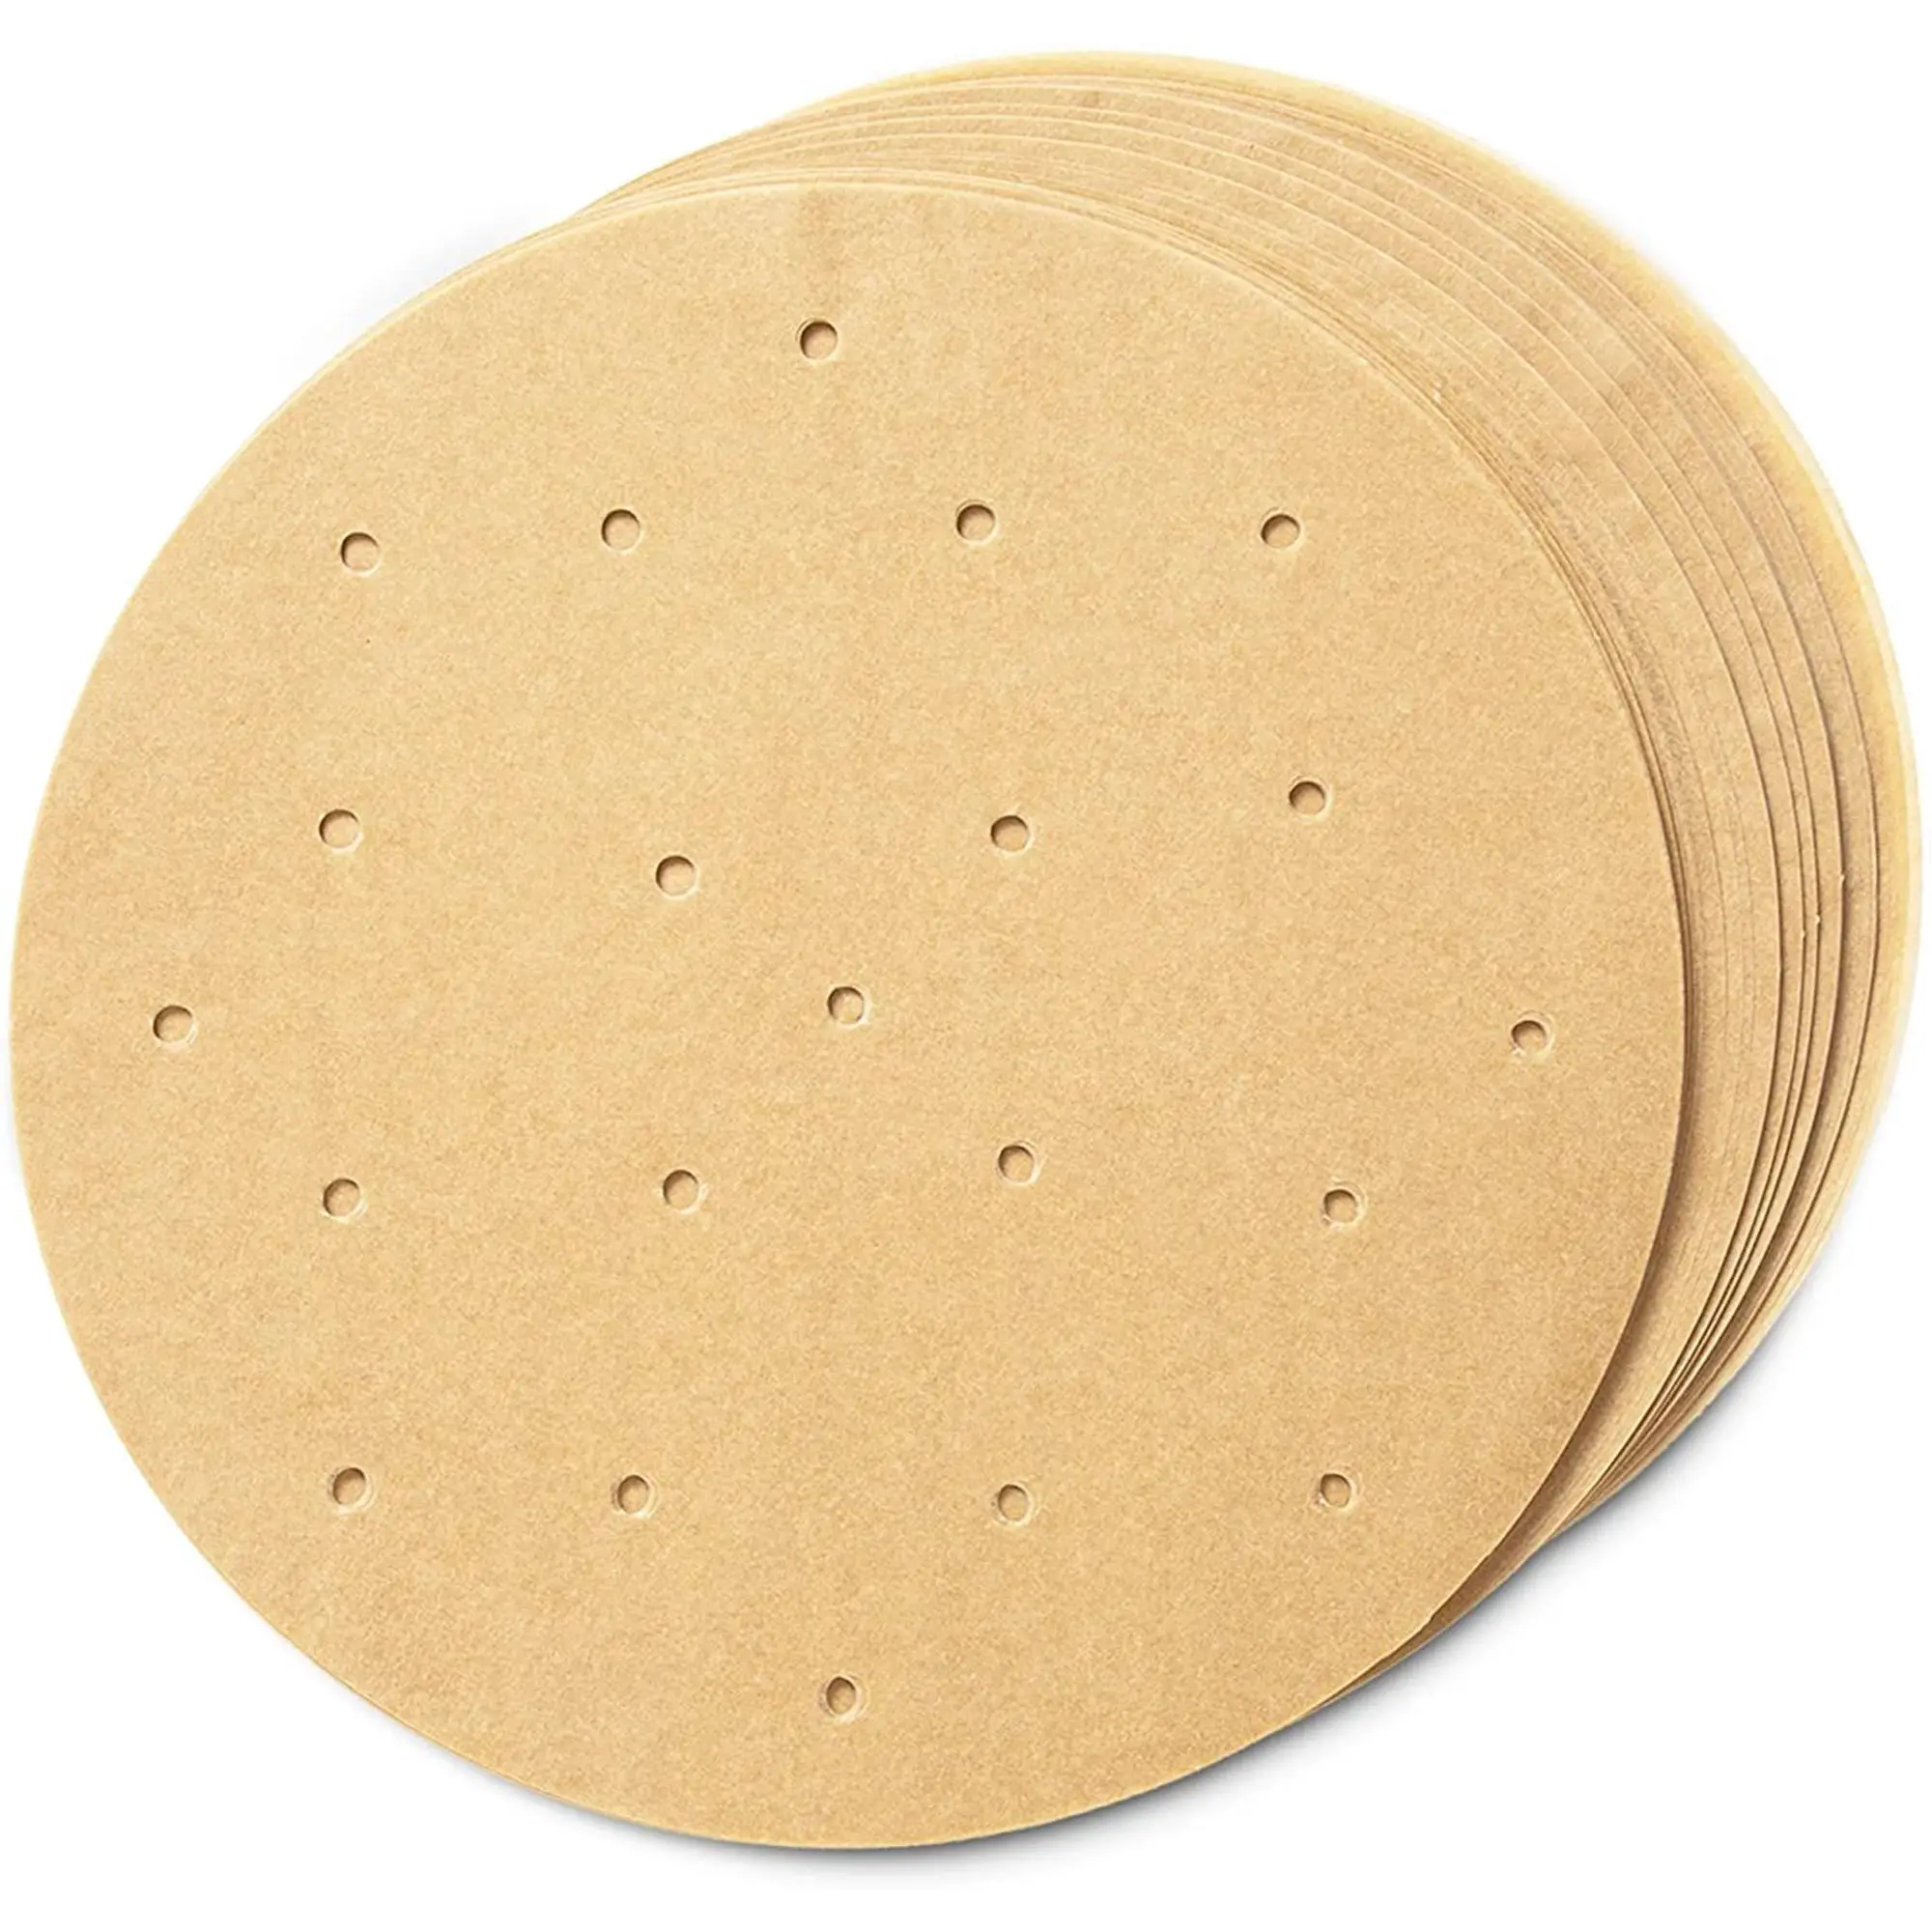 200 Pcs 8"  Round Air Fryer Liners, Unbleached Perforated Parchment ...